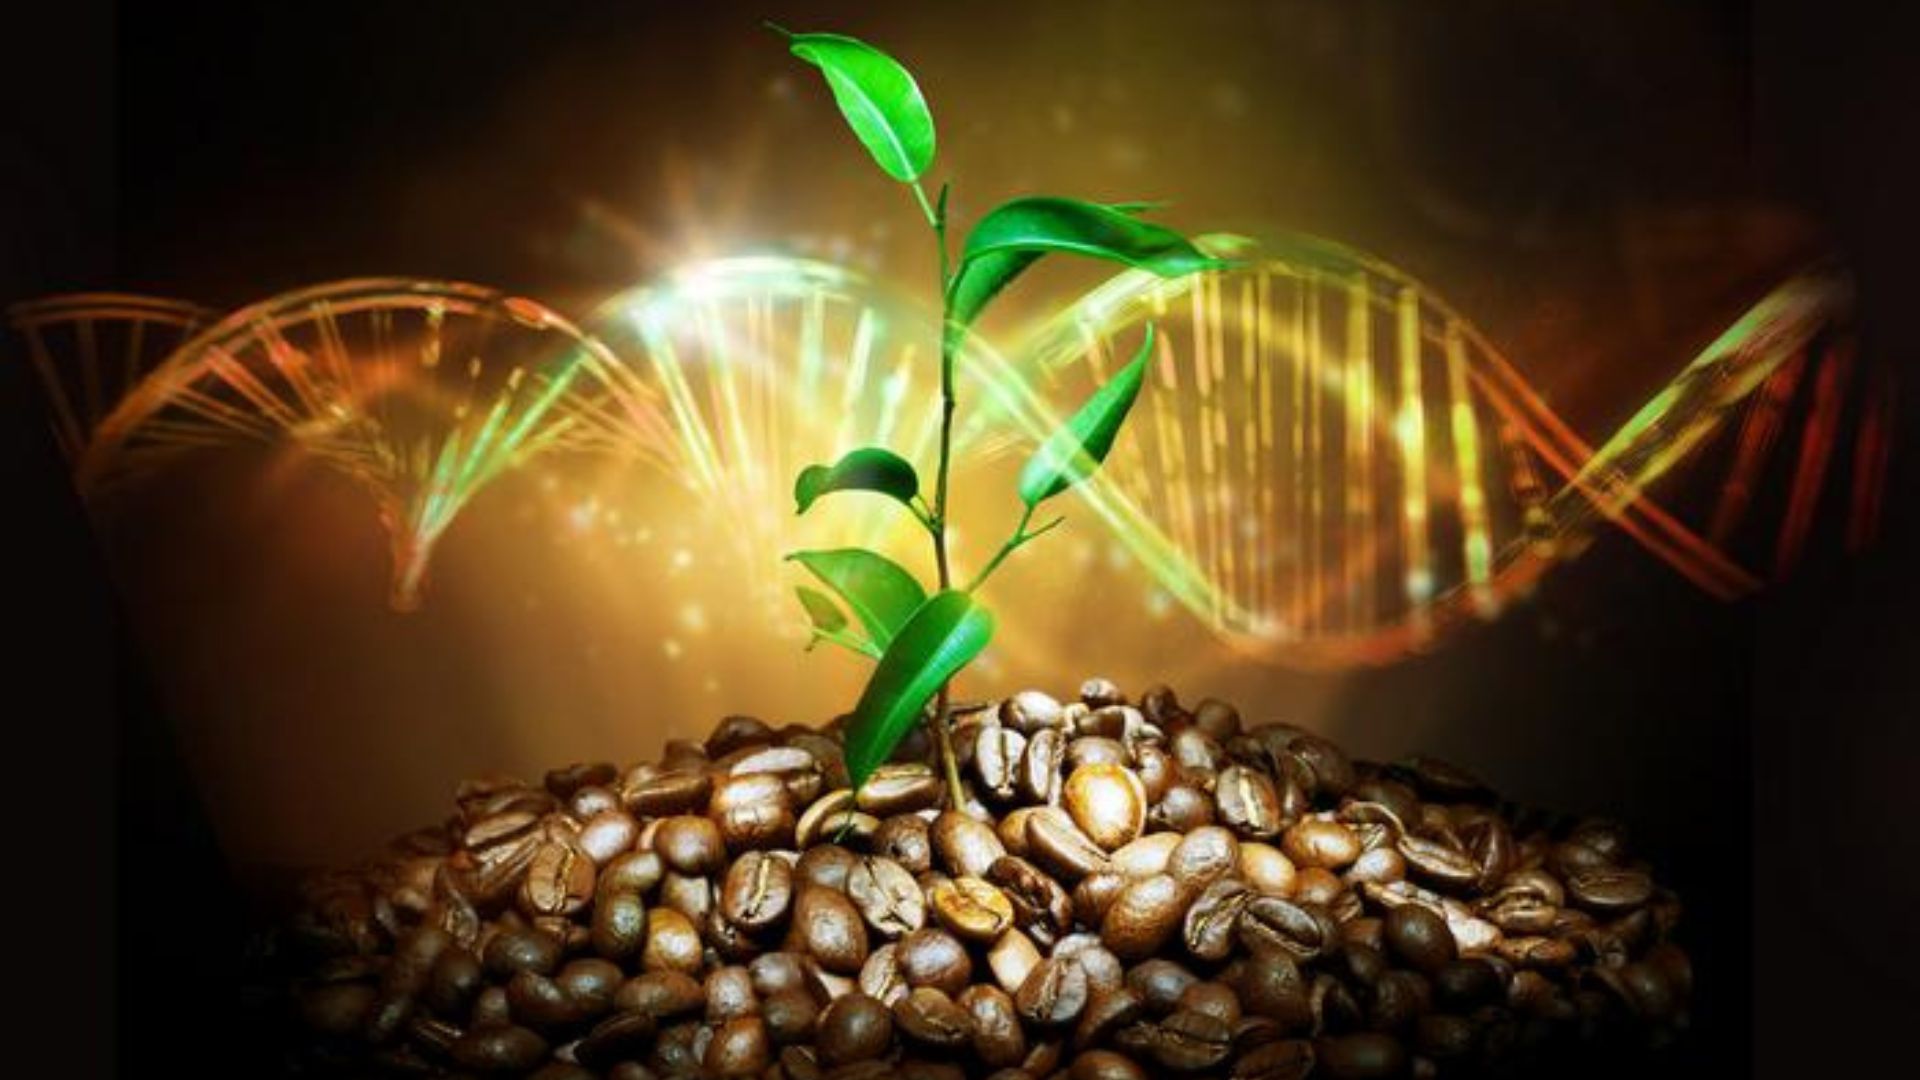 Highest quality reference genome of Arabica coffee species created [Video]